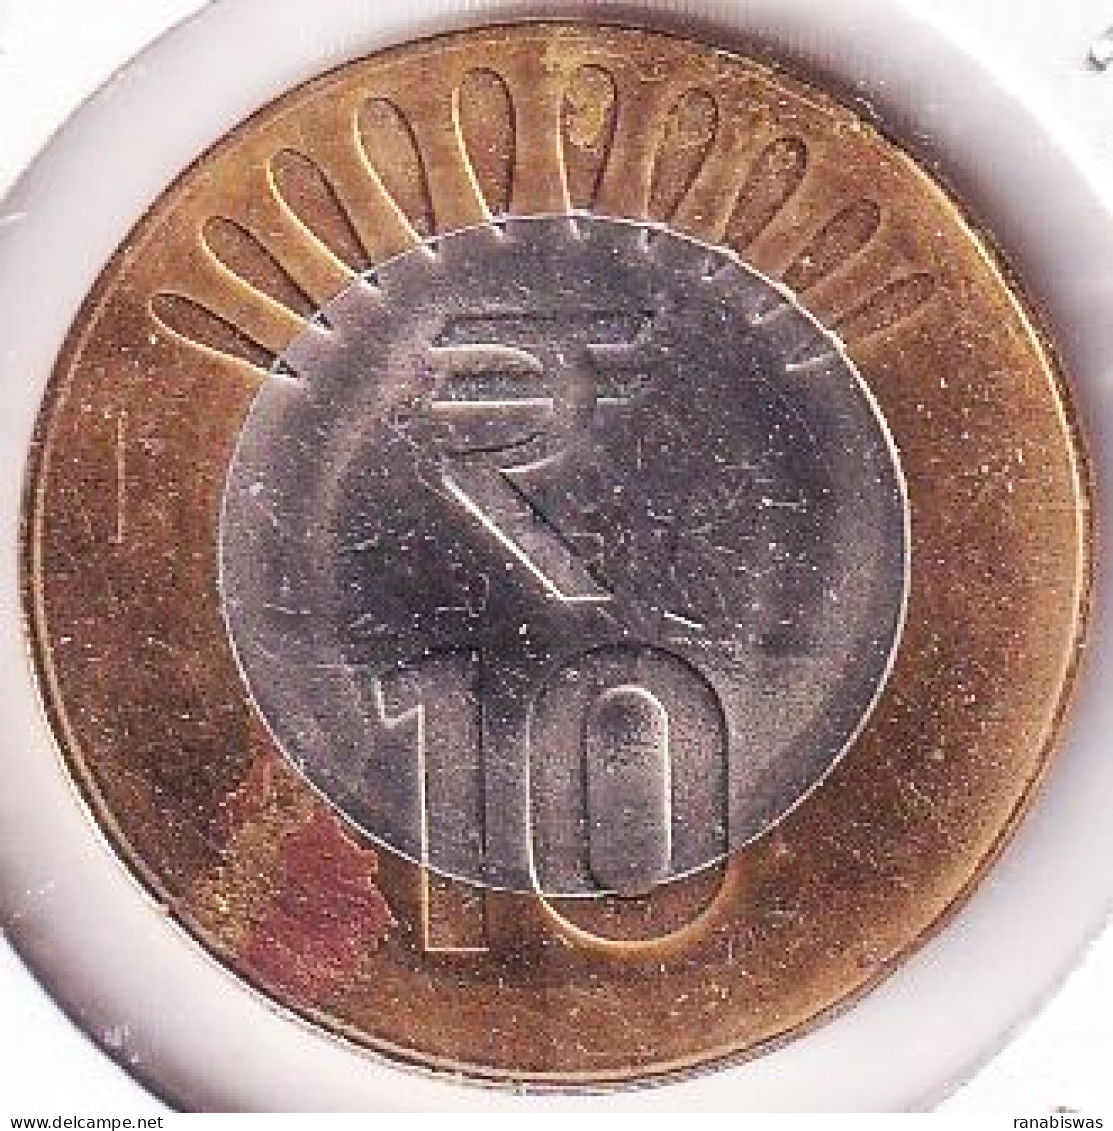 INDIA COIN LOT 449, 10 RUPEES 2017, CALCUTTA MINT, XF, IMPRESSION SHIFTED ERROR - Inde